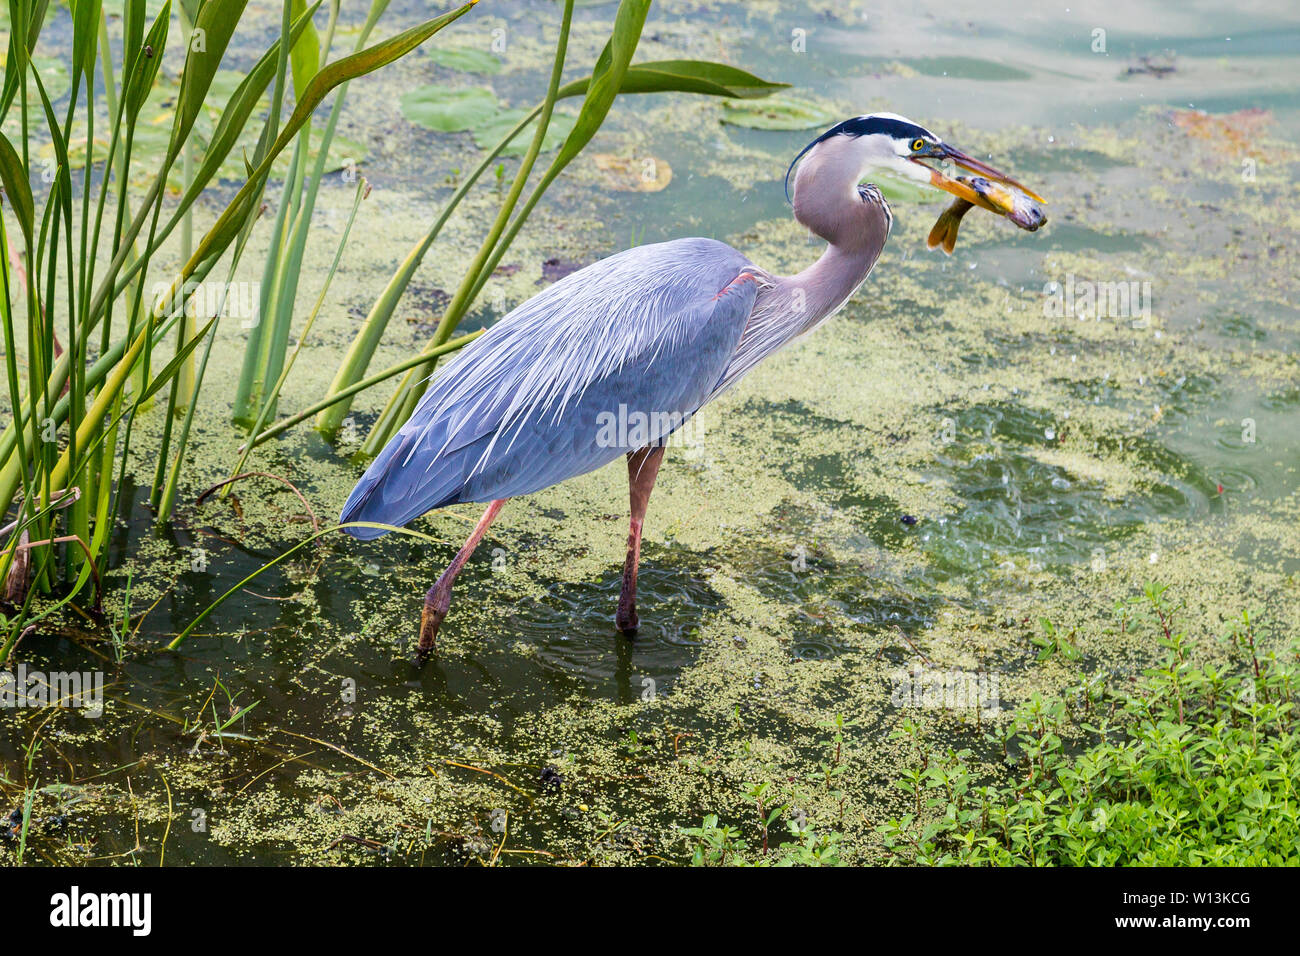 A great blue heron catches a small fish in his beaks in a retention basin, Celebration, Florida, USA. Stock Photo